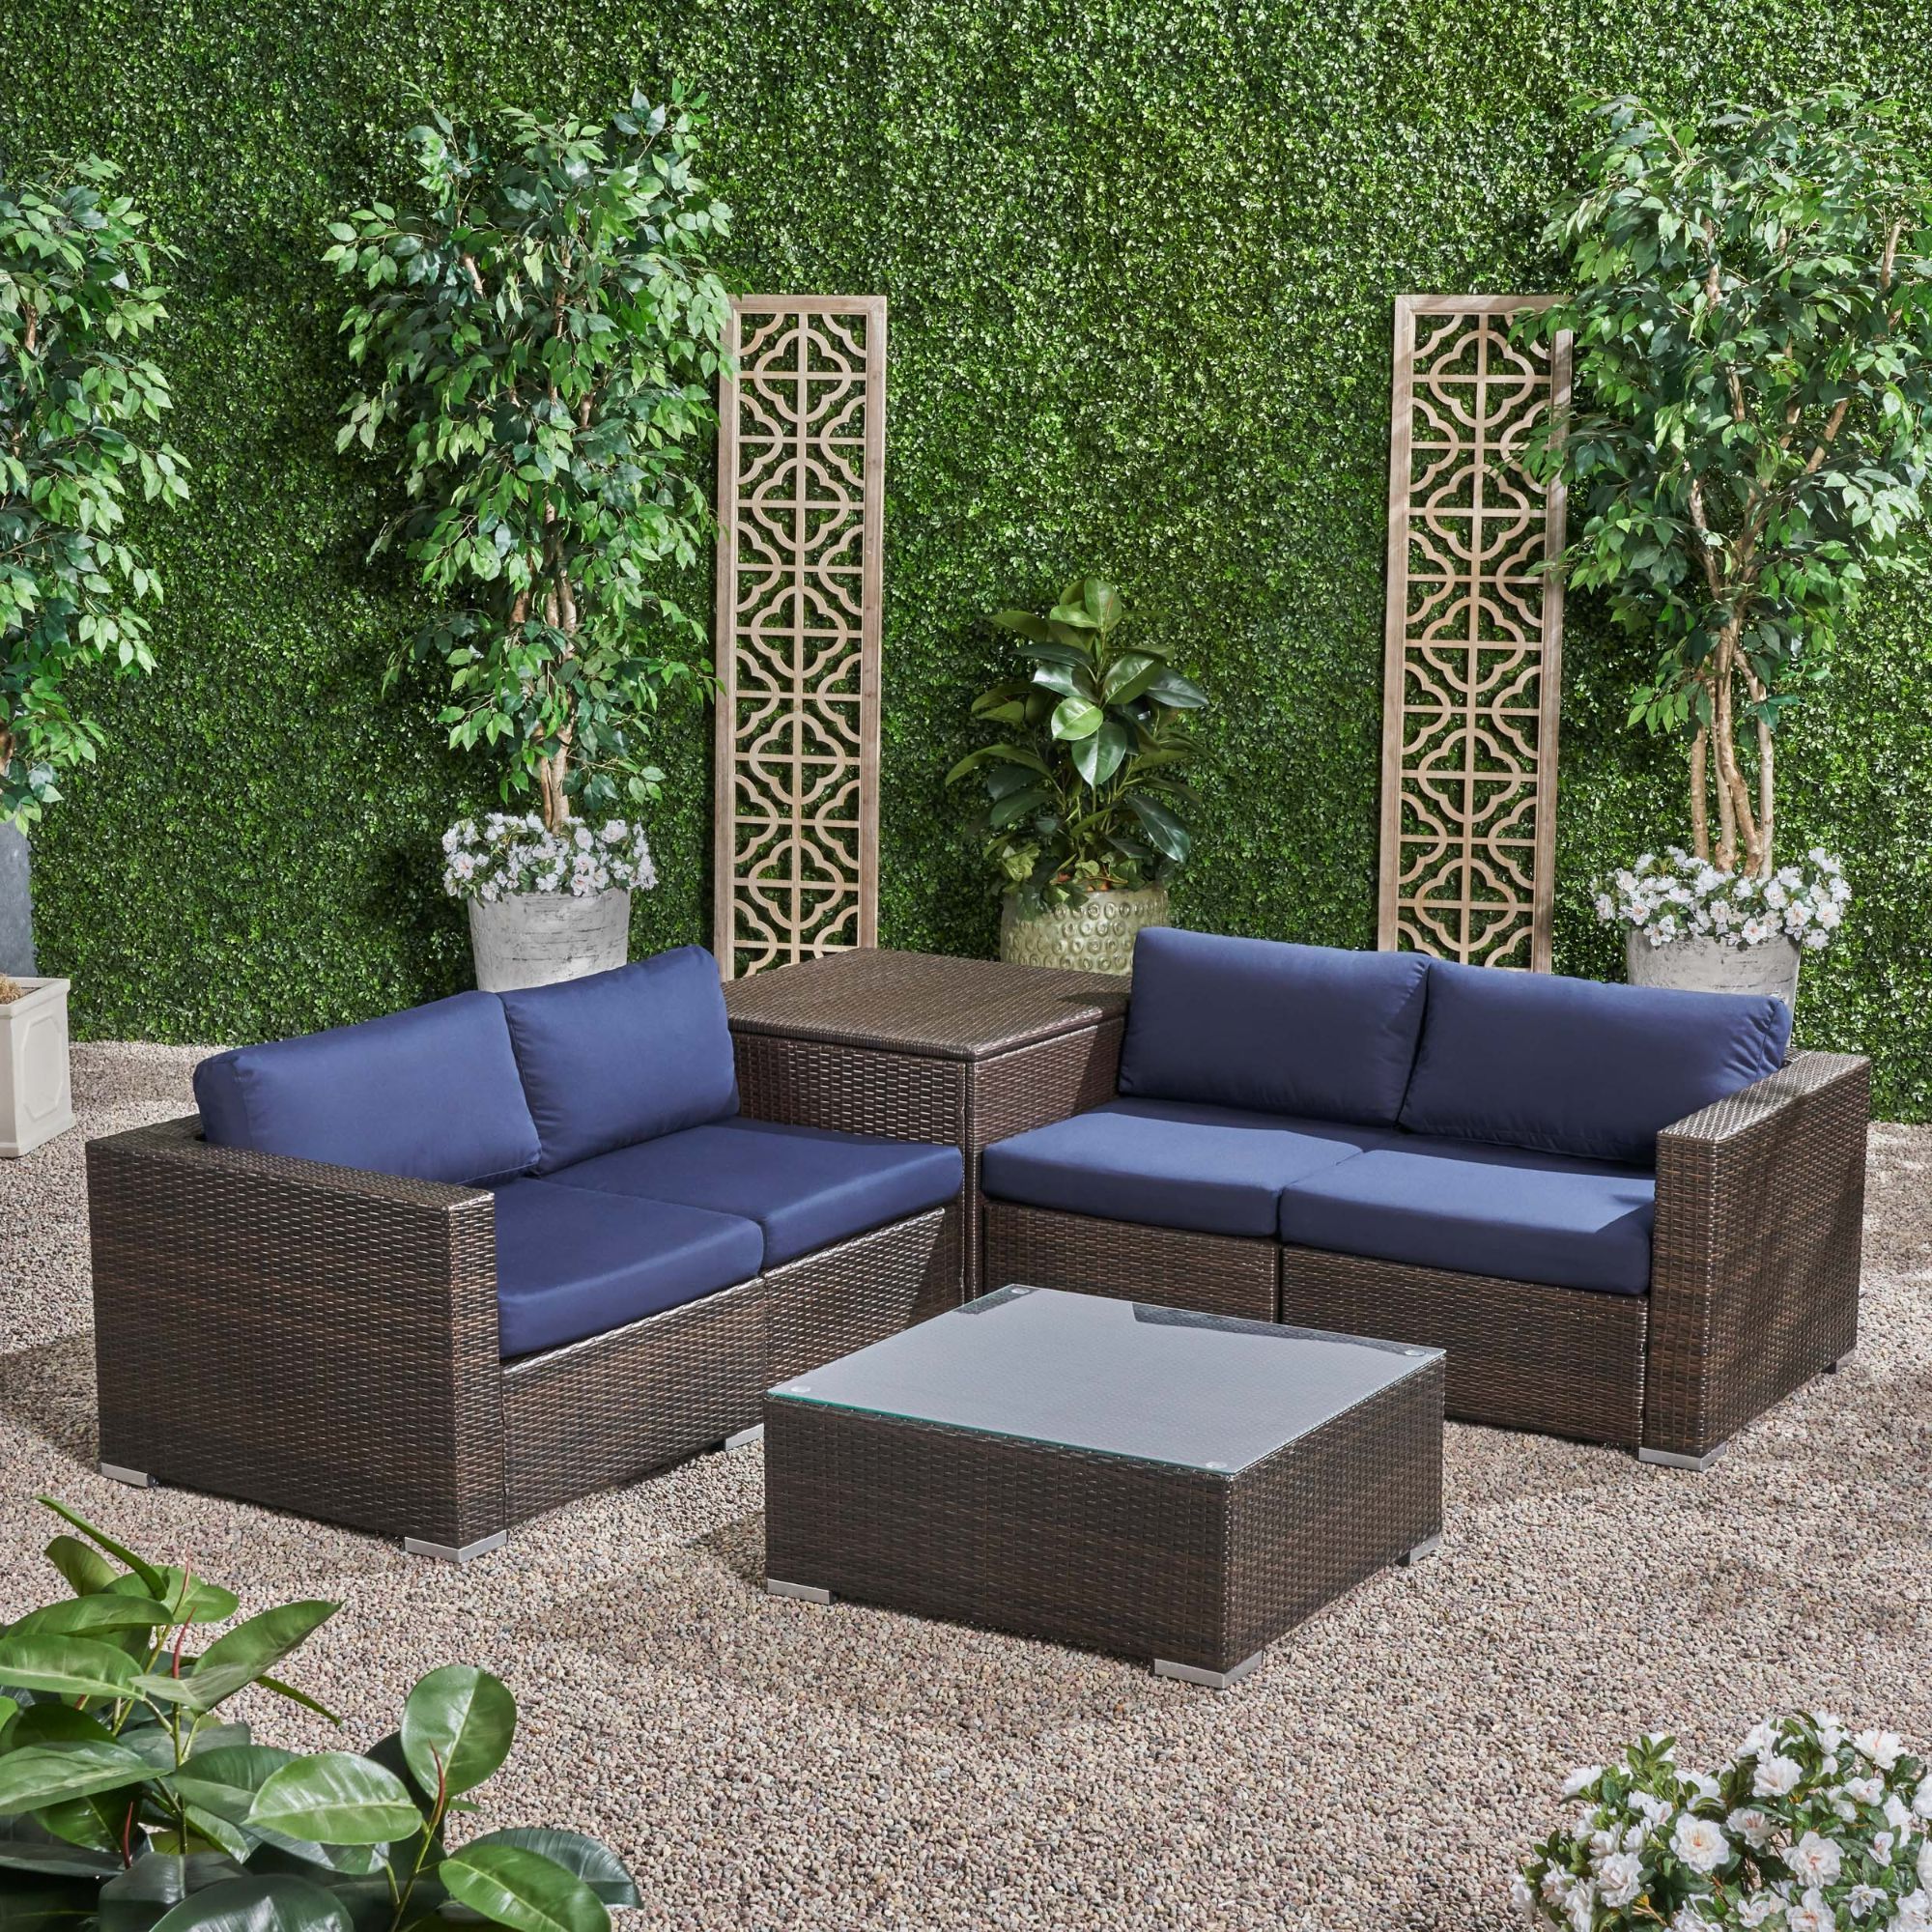 Well Liked Navy Outdoor Seating Sectional Patio Sets Pertaining To 6 Piece Brown Wicker Finish Outdoor Furniture Patio Conversation Set (View 3 of 15)